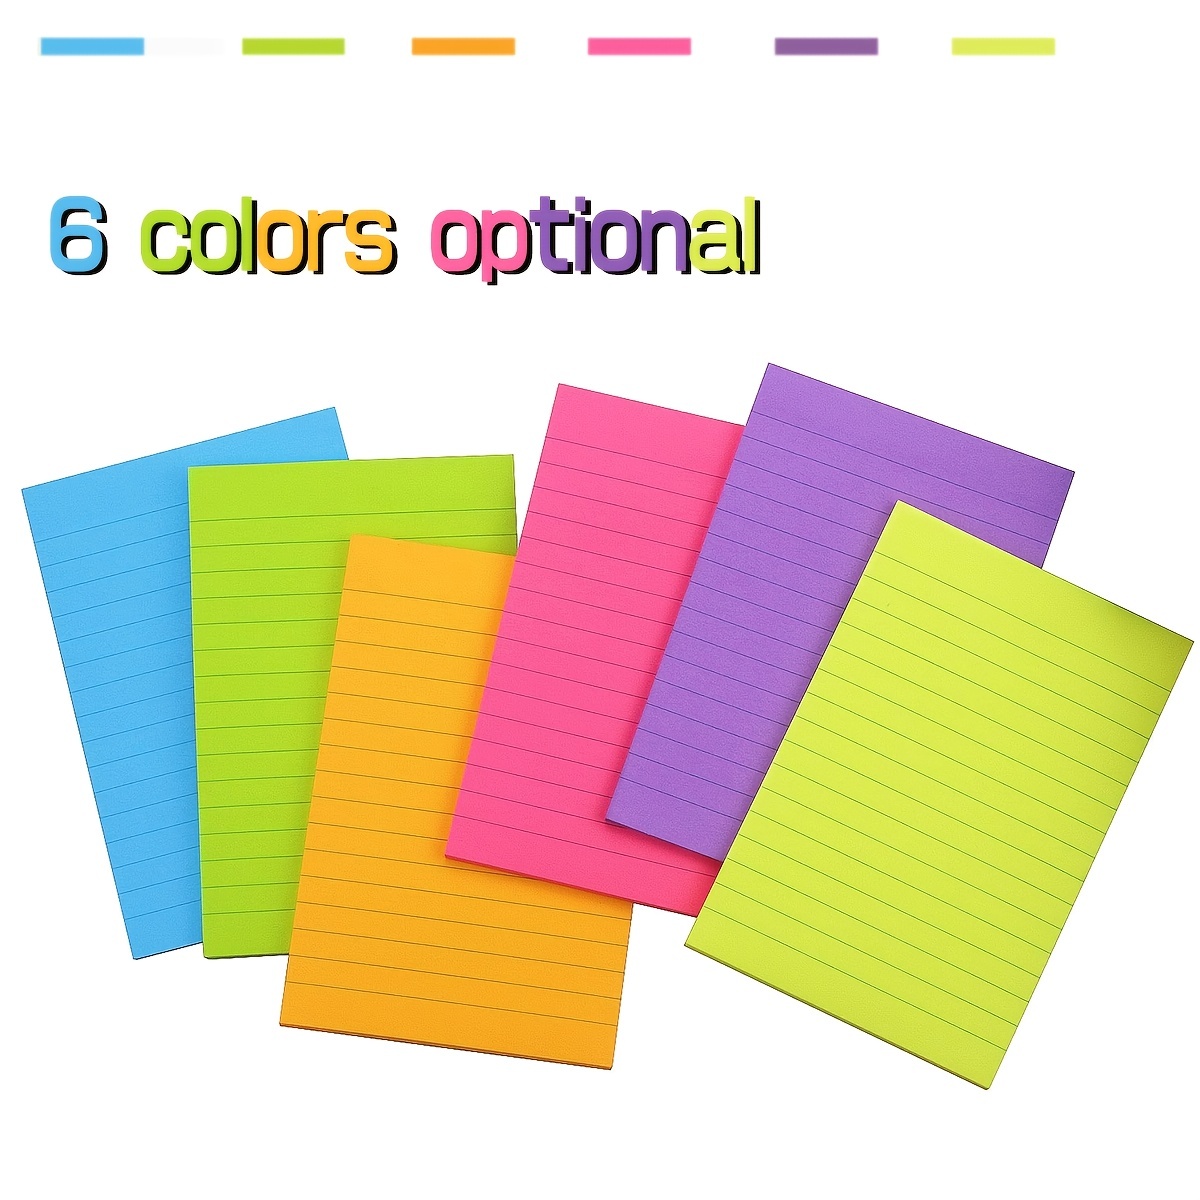 6 Pad Big Sticky Notes 11 x 11 Inch Self Stick Pads Large Sticky Paper 6  Assorted Colors Sticky Notepad for Wall Notebook Home Office, Pink Orange